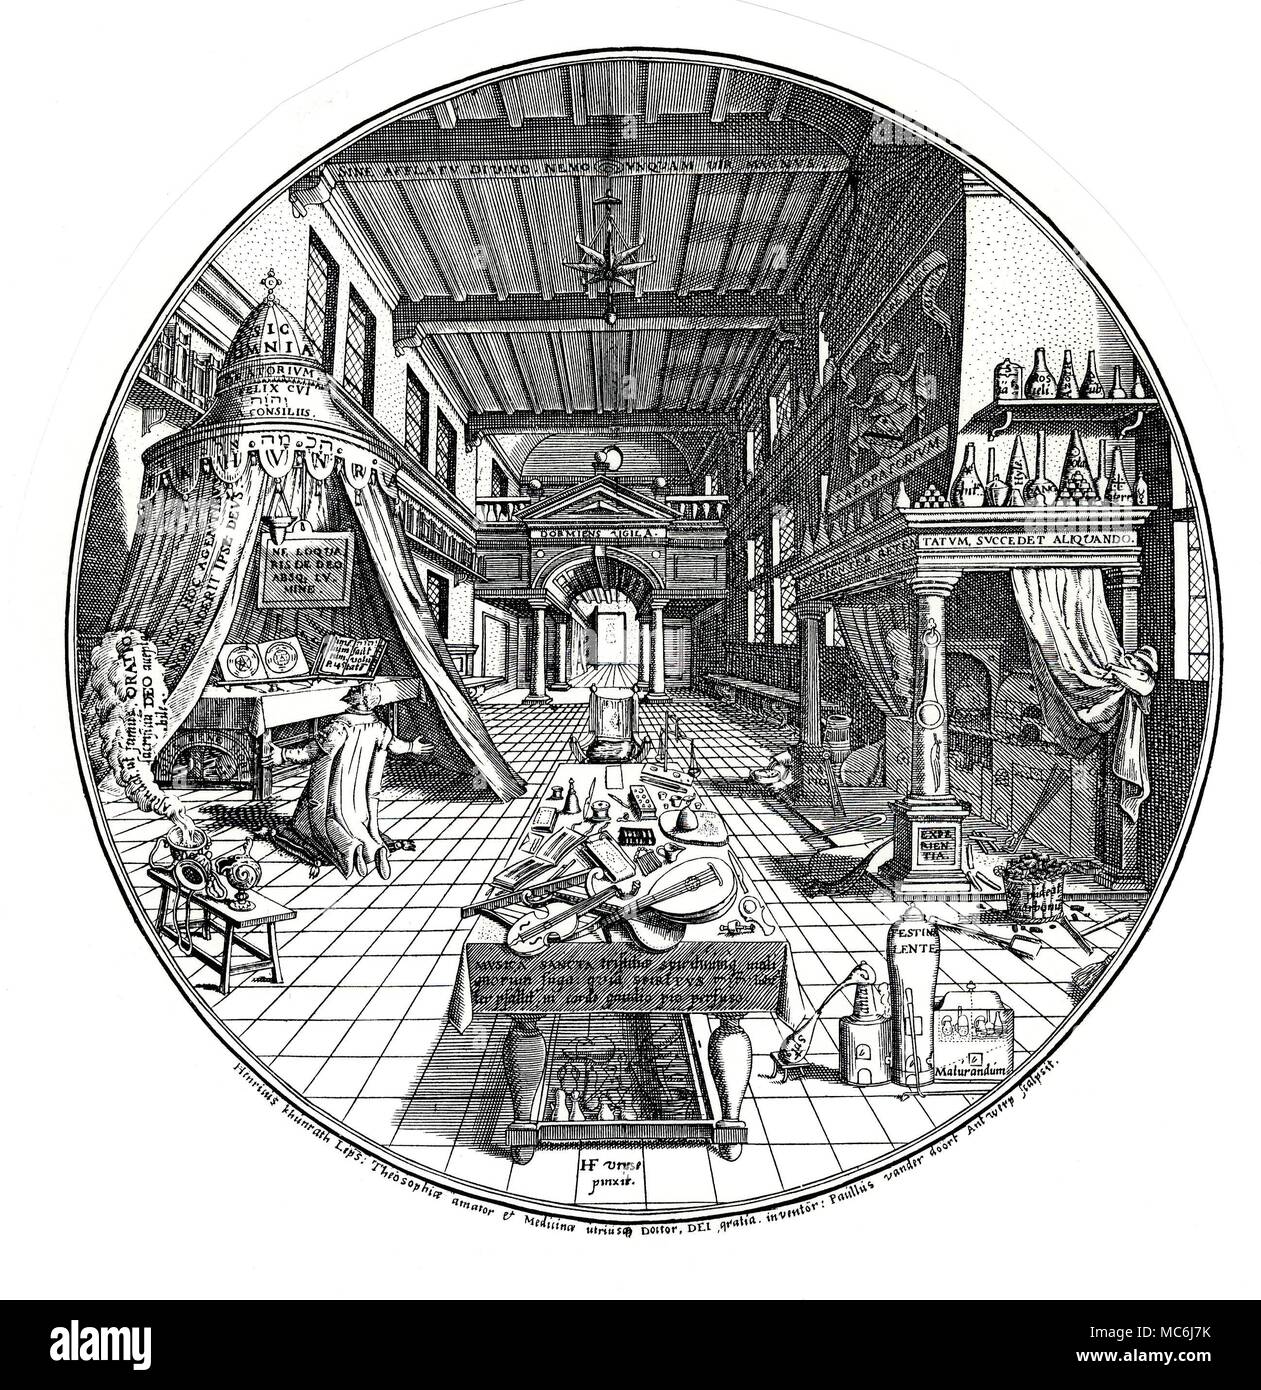 ALCHEMY - THE LABORATORY The alchemical laboratory, as a place of prayer and experimentation - from Heinrich Khunrath, Amphitheatrum Sapientiae Aeternae, 1602. An excellent survey of the Latin mottoes and meditations, may be found in Stanislass Klossowiski de Roal, The Golden Game. Alchemical Engravings of the Seventeenth Century, 1988, p.44. Stock Photo